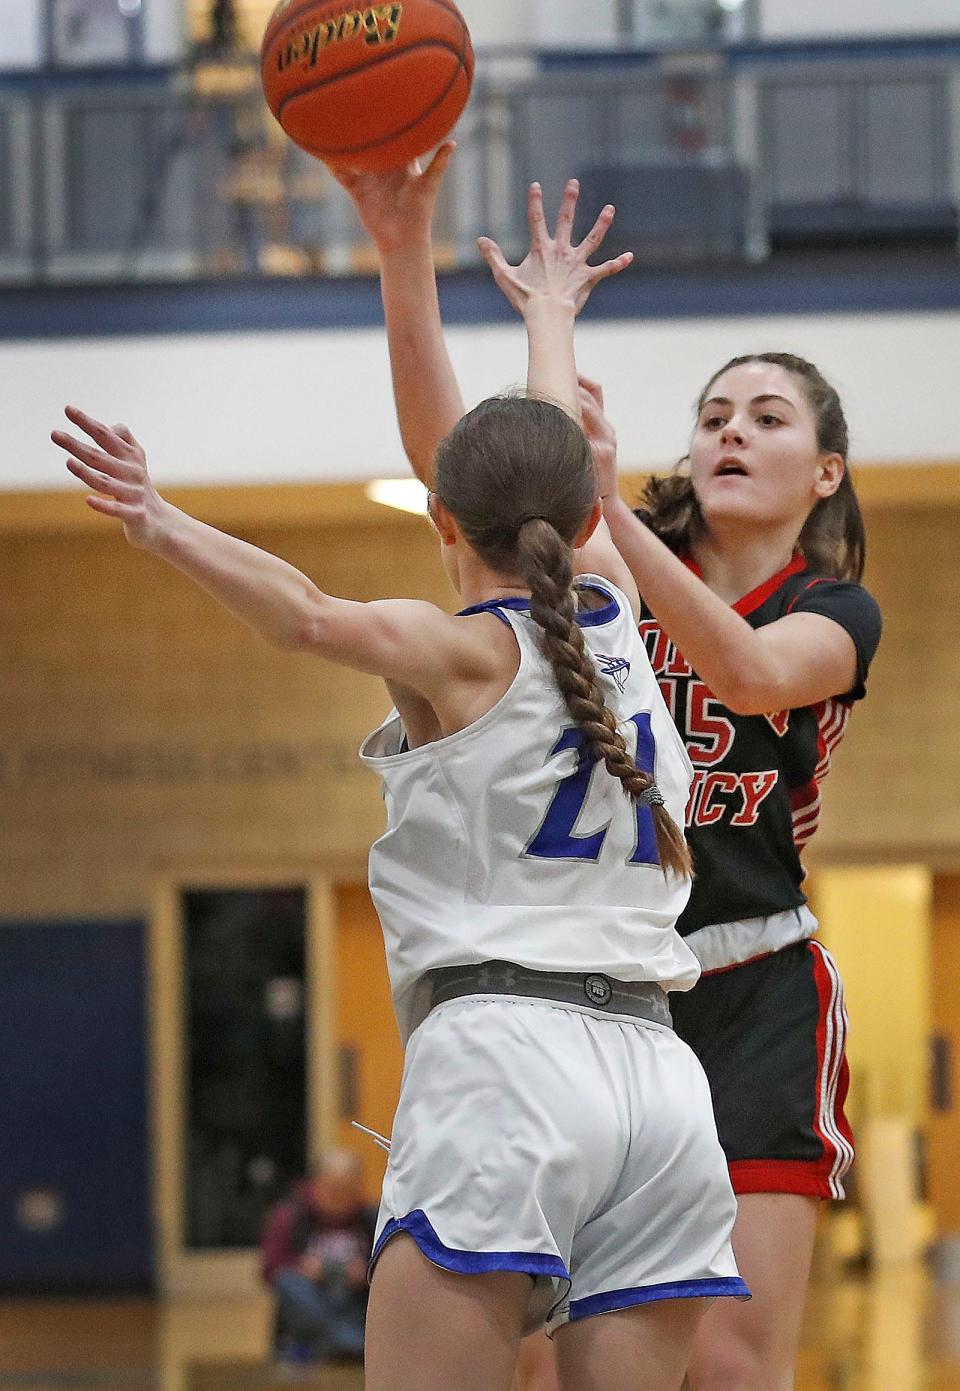 Quincy guard Caroline Campbell tries to block a North shot by Ava Bryan.
Quincy High hosted North Quincy High in basketball. Both girls and boys teams played on Friday January 20, 2023.